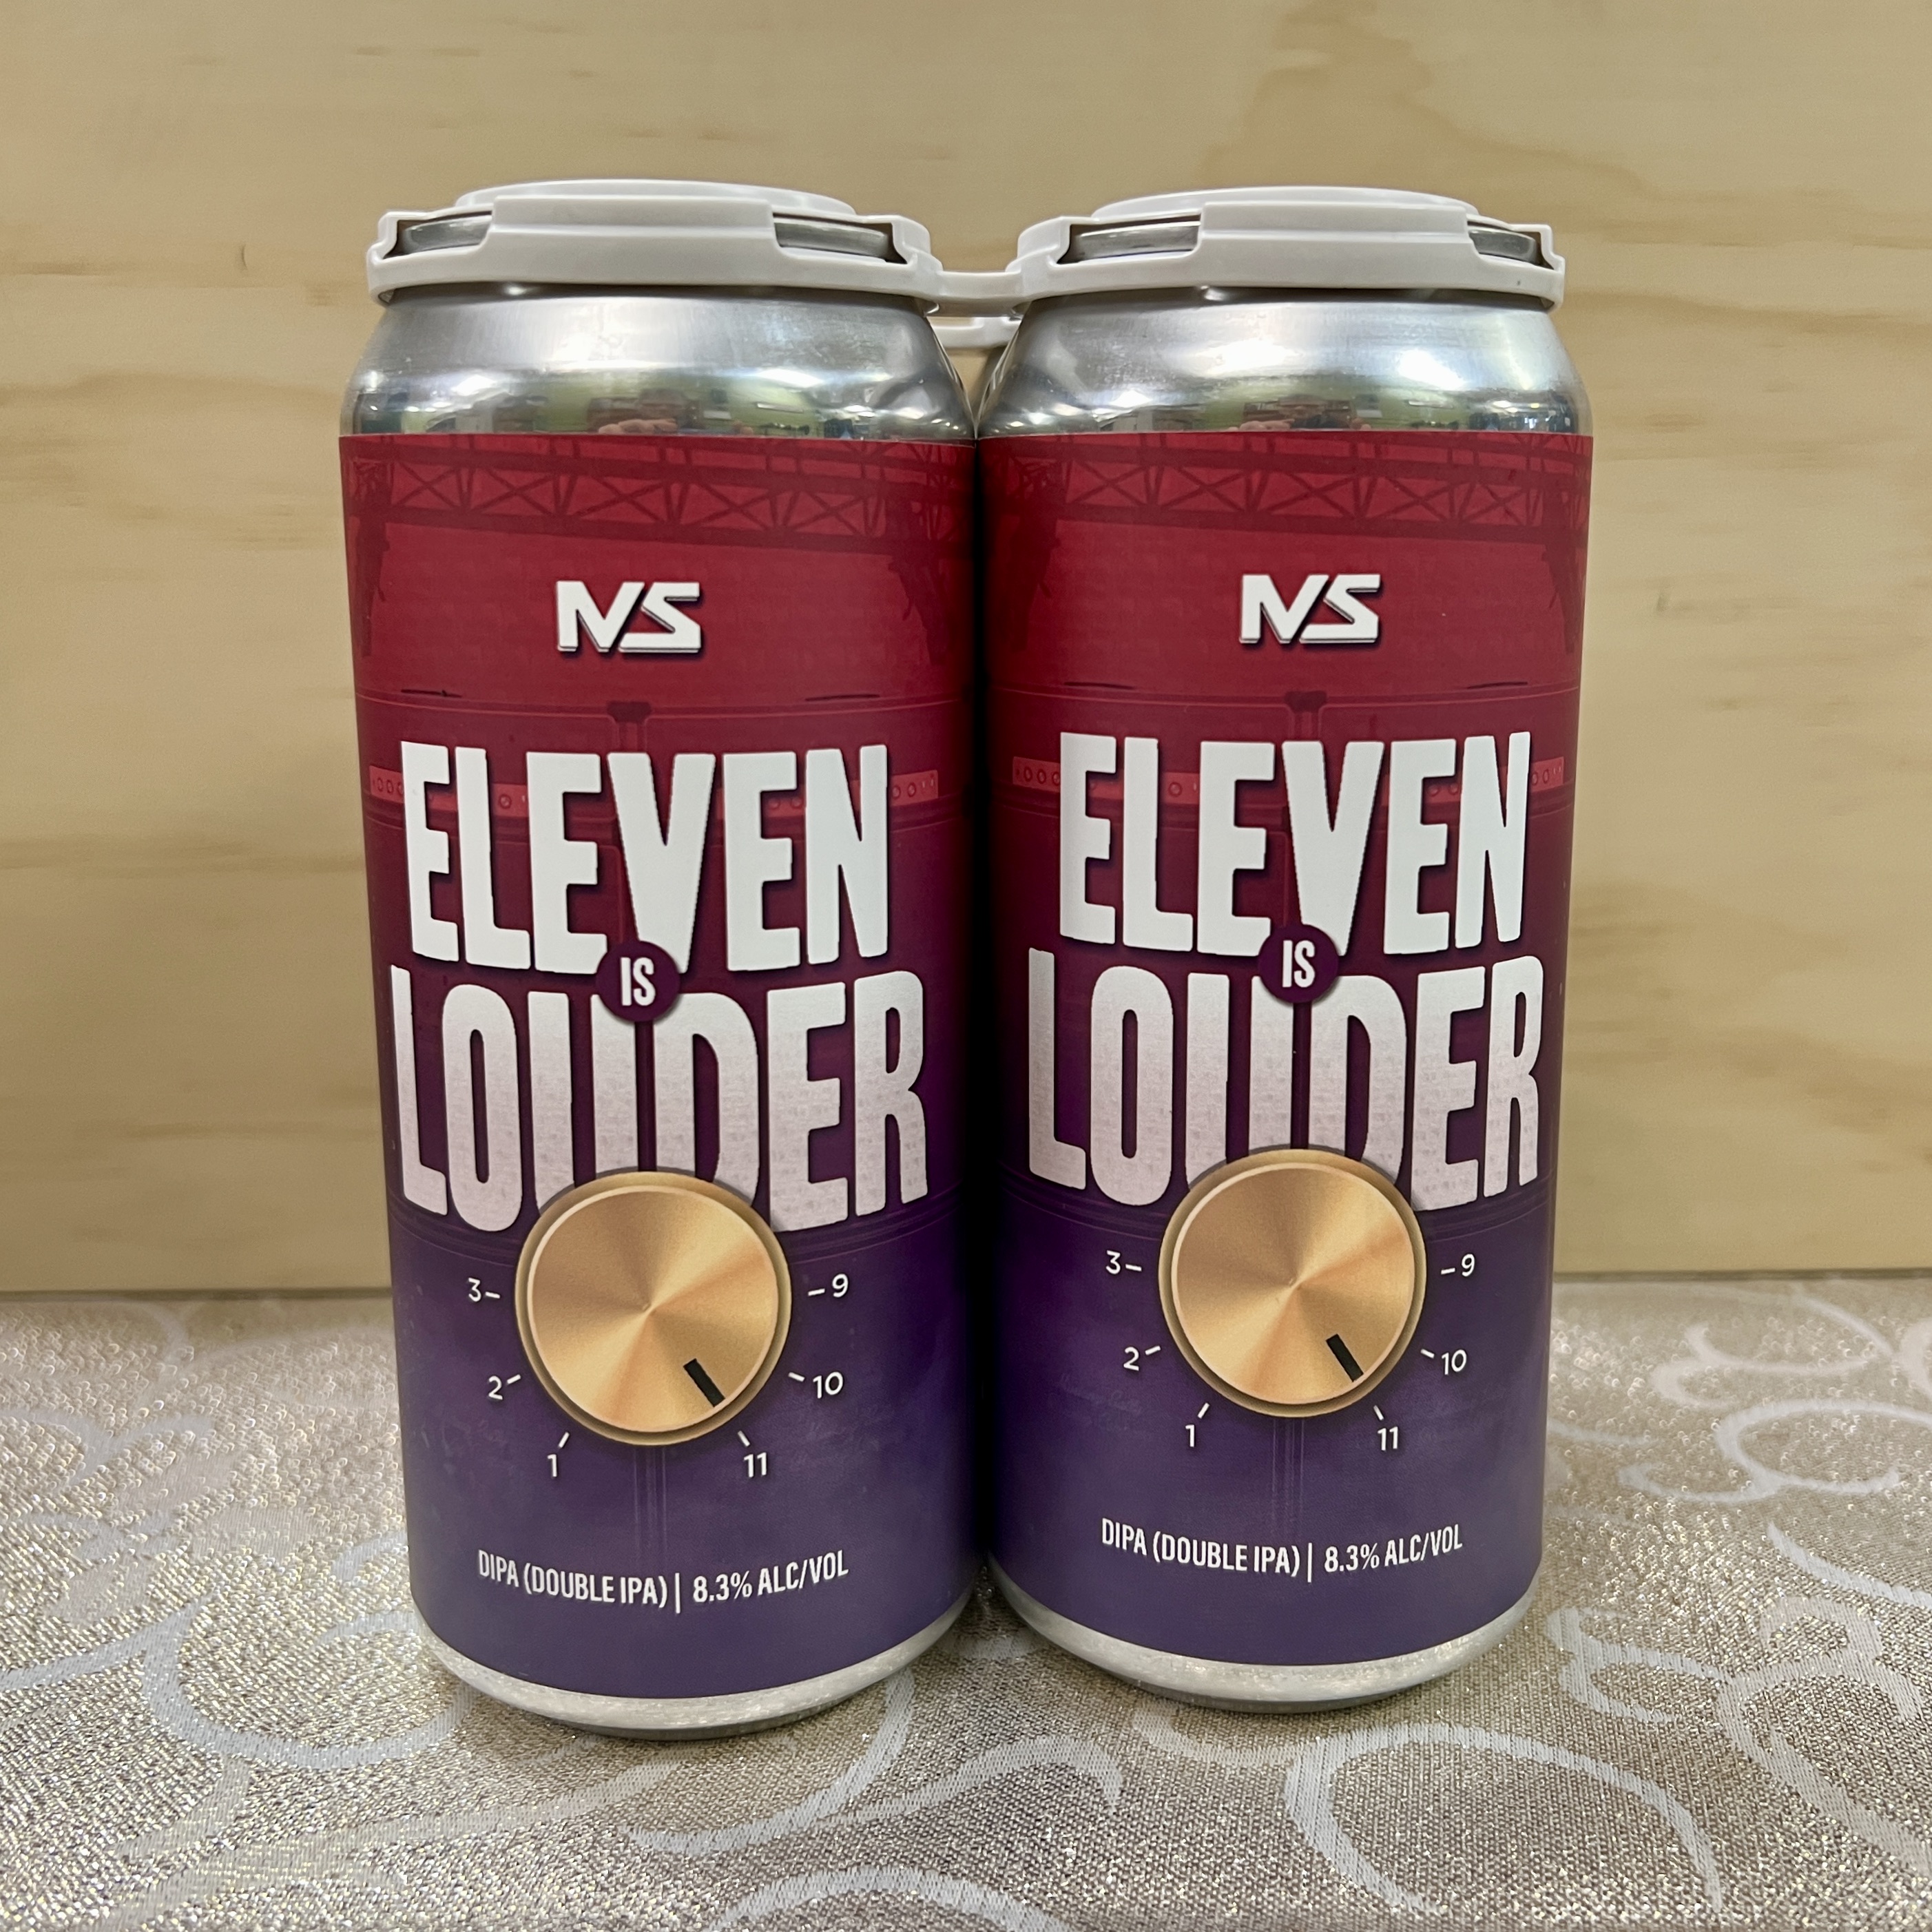 Mustang Sally Eleven is Louder Double IPA 4 x 16oz cans